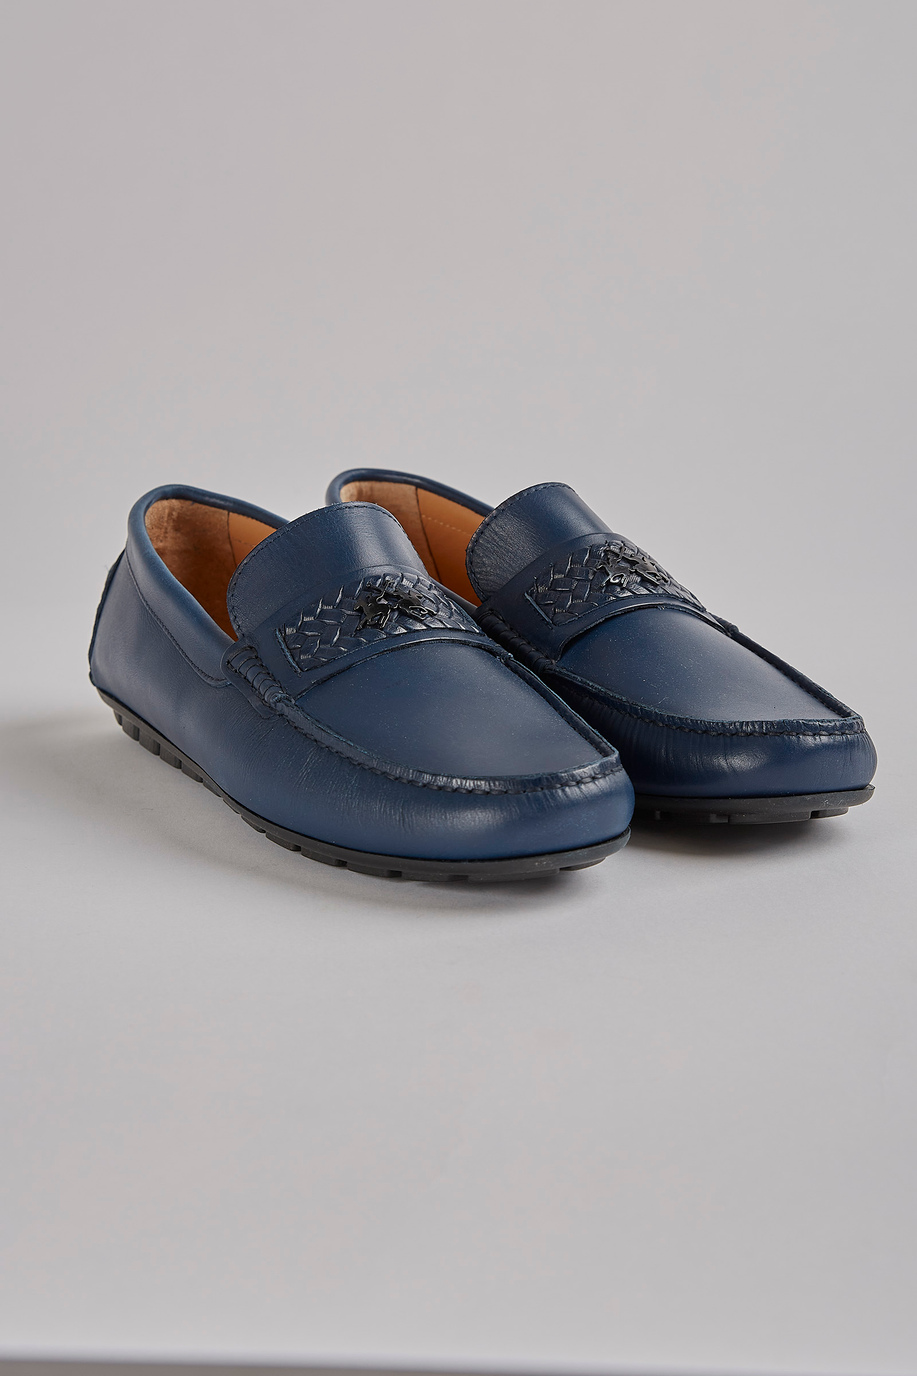 Hand-stitched leather loafer